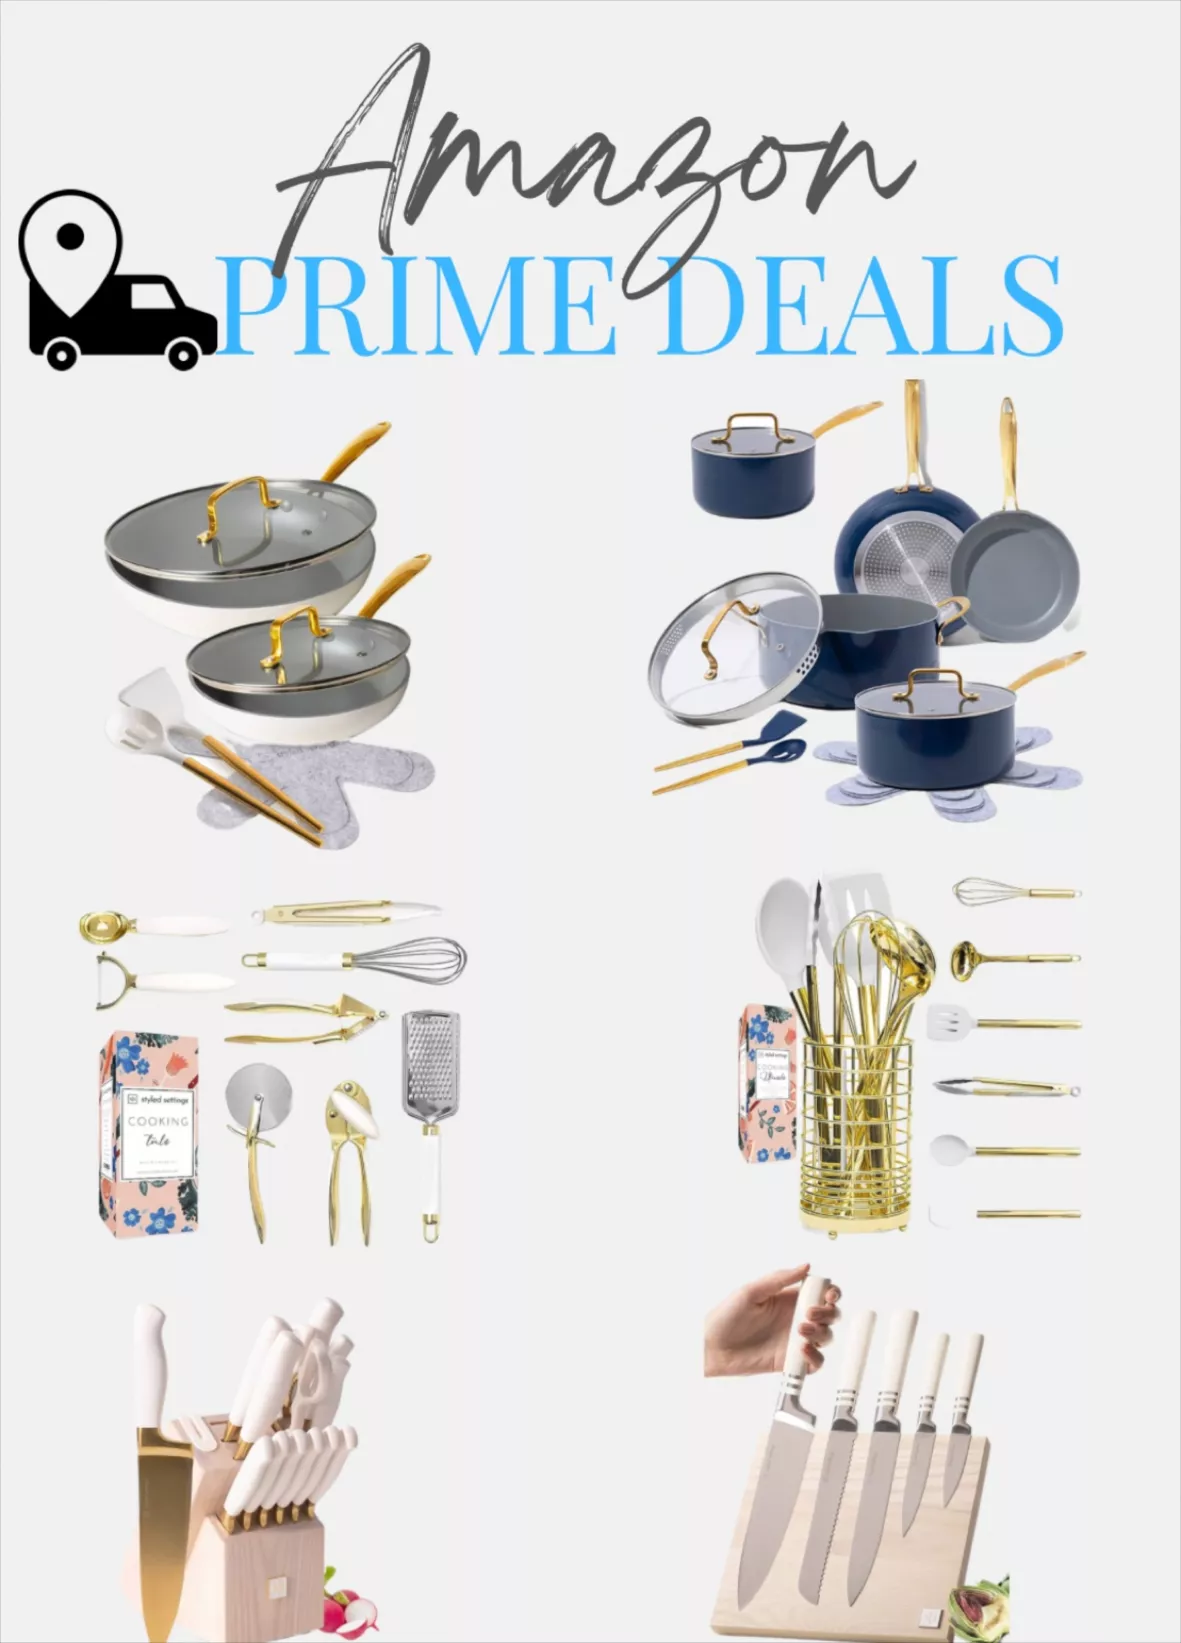 Styled Settings White Silicone and Gold Cooking Utensils Set 